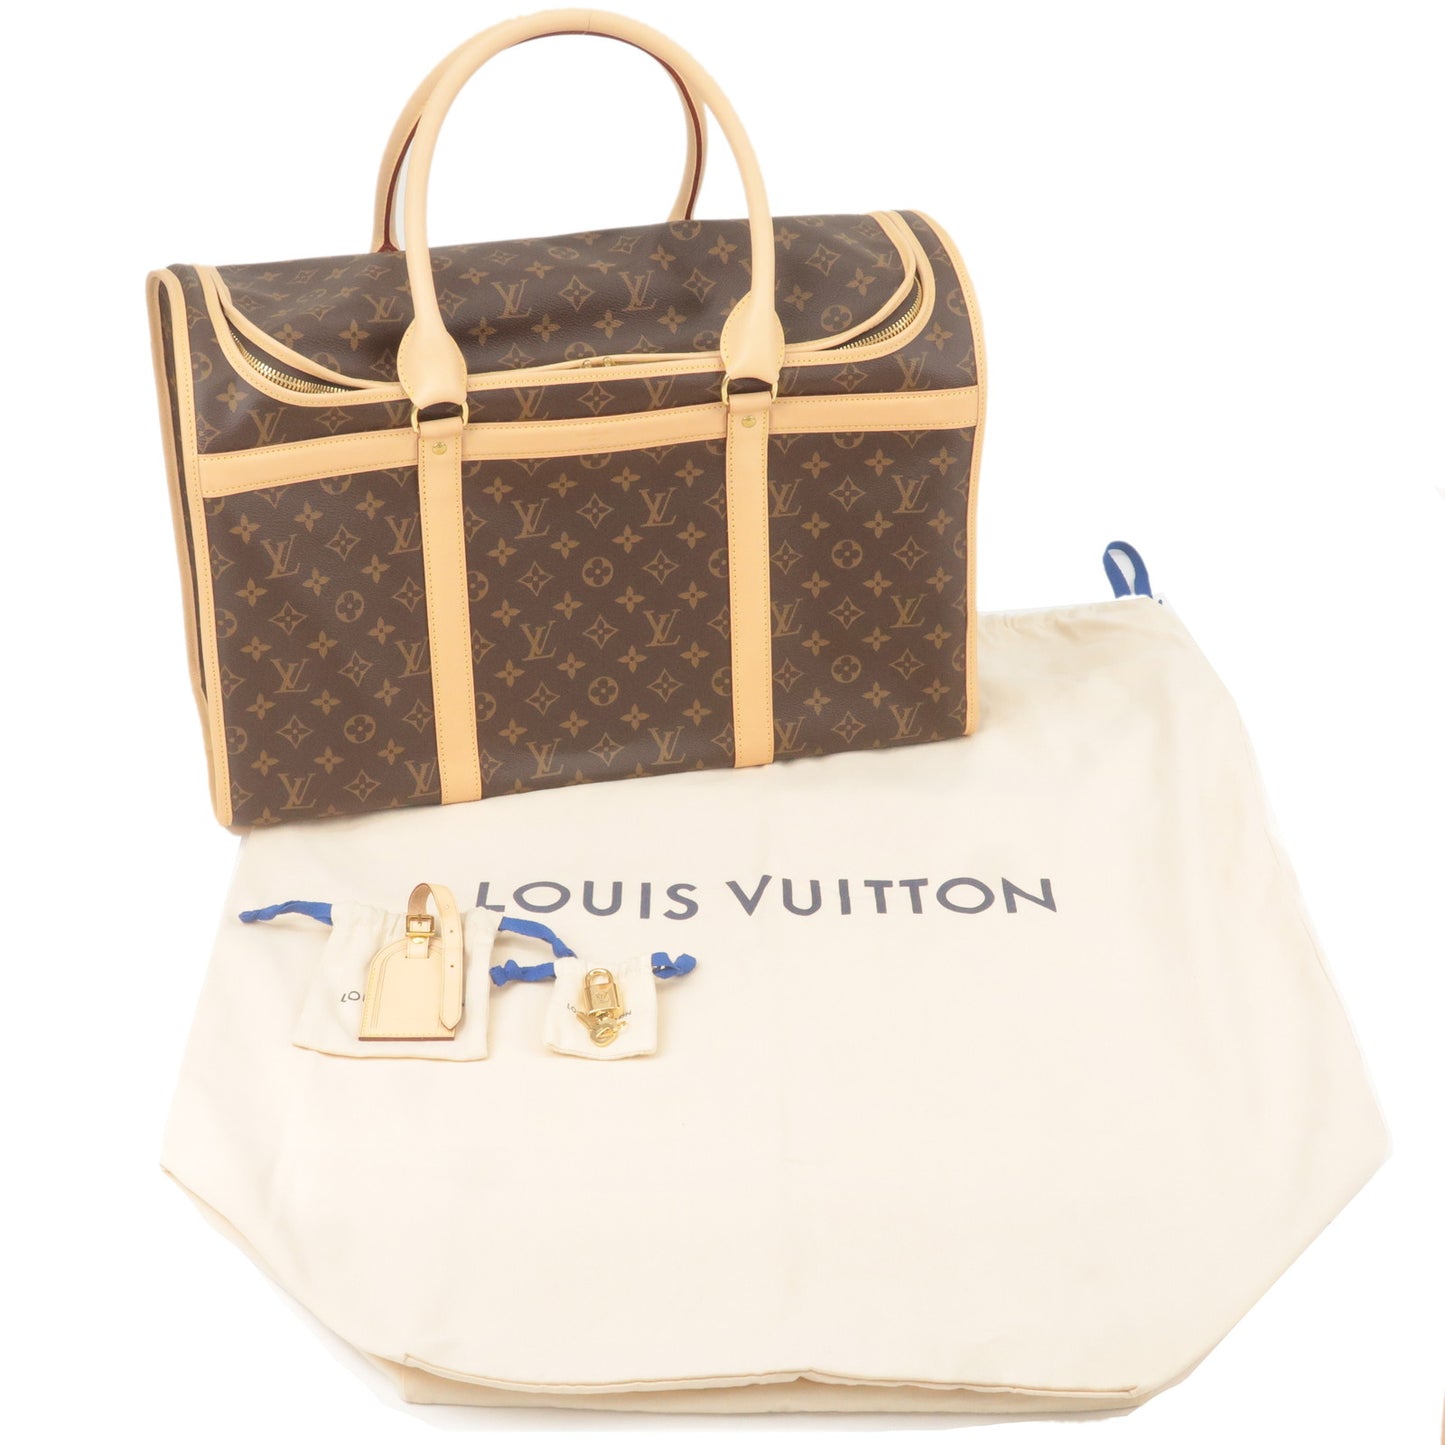 Louis Vuitton Sac Chien 50 LV Dog or Cat Carrier Bag 50 Monogram FREE  POSTAGE & FREE BAG NAME TAG For ANY Small Animal Pet Pets Friendly Bag  M42021